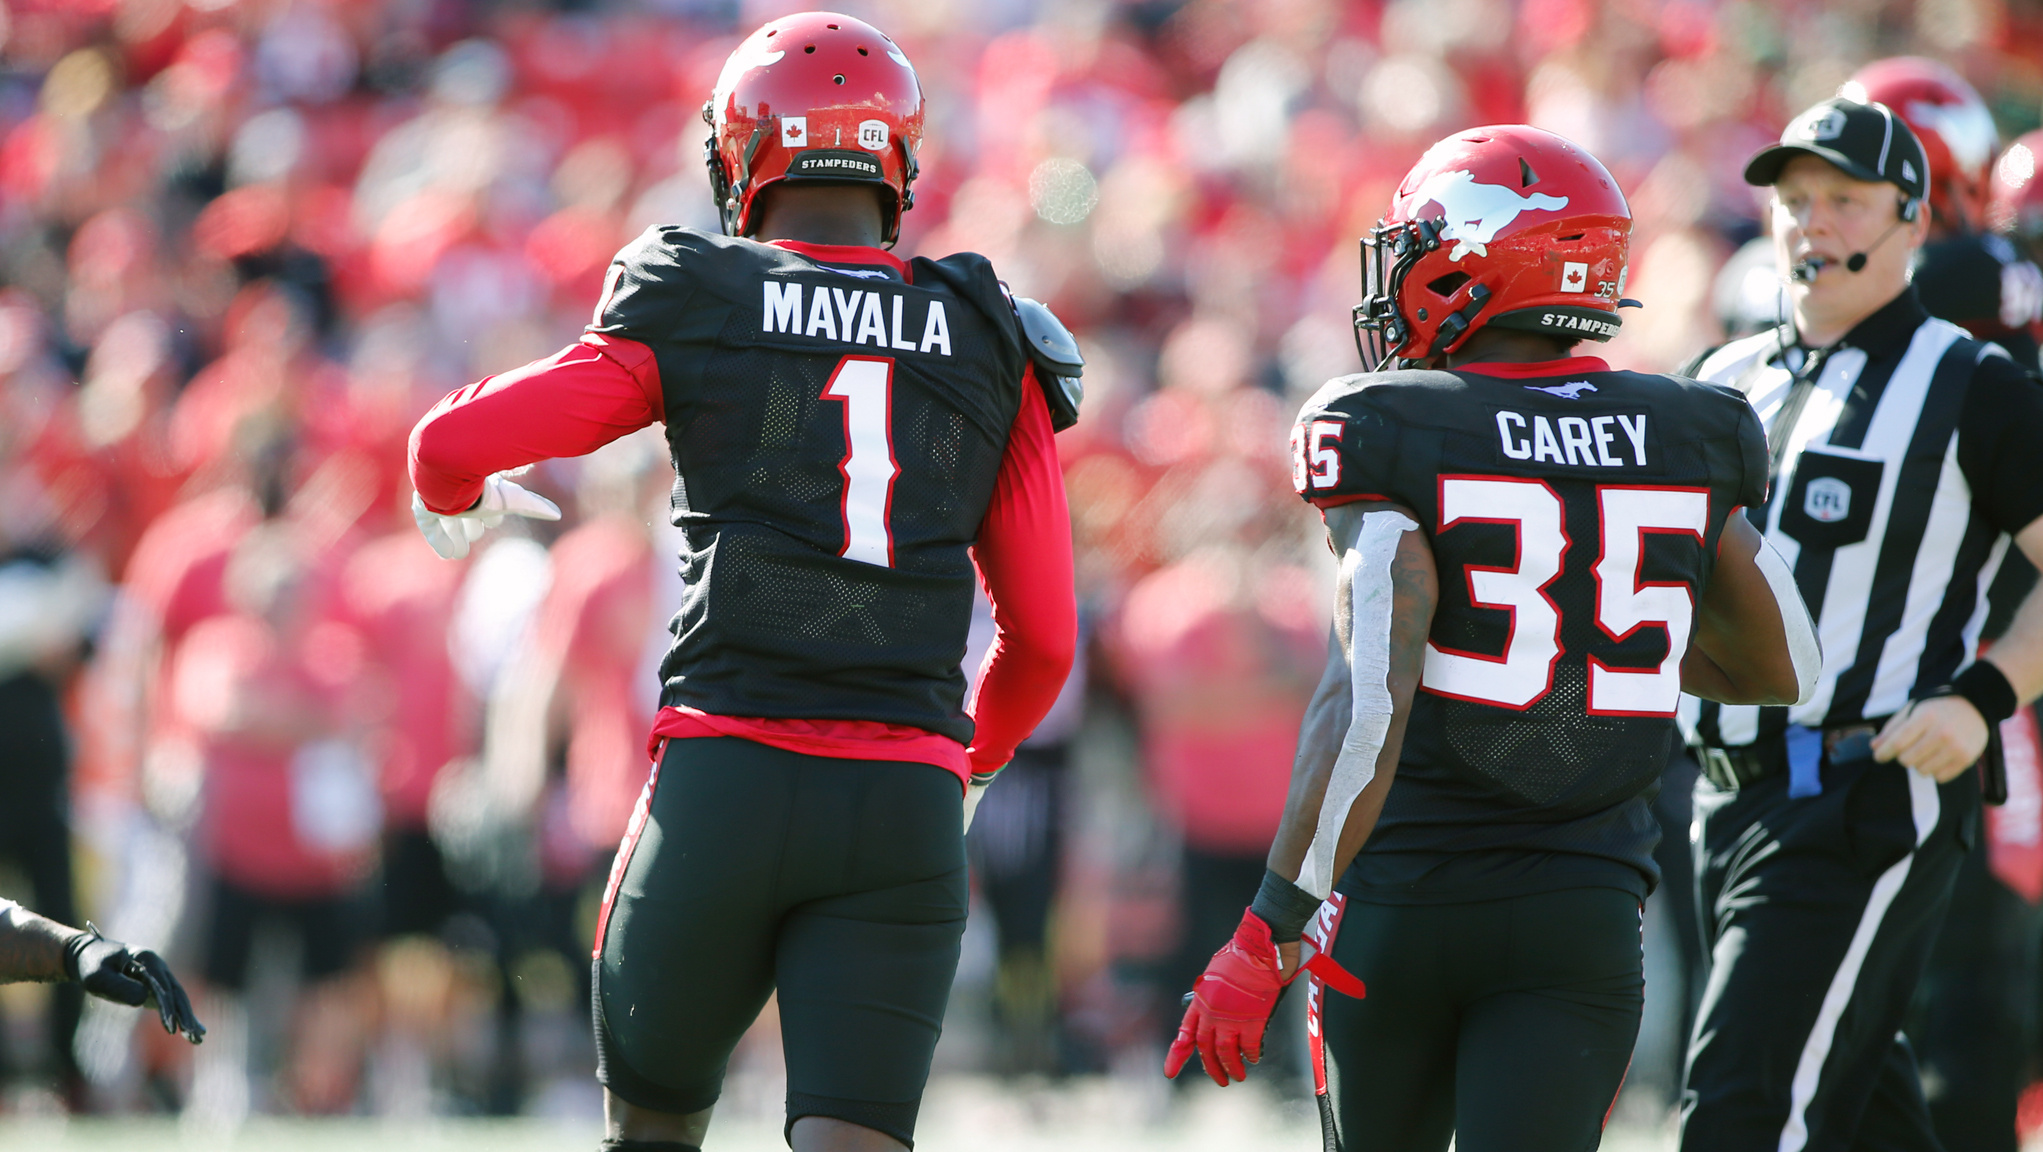 Canadian Football: Hergy Mayala and Ka'Deem Carey of The Calgary Stampeders, The CFL West Division, Referee. 2050x1160 HD Wallpaper.